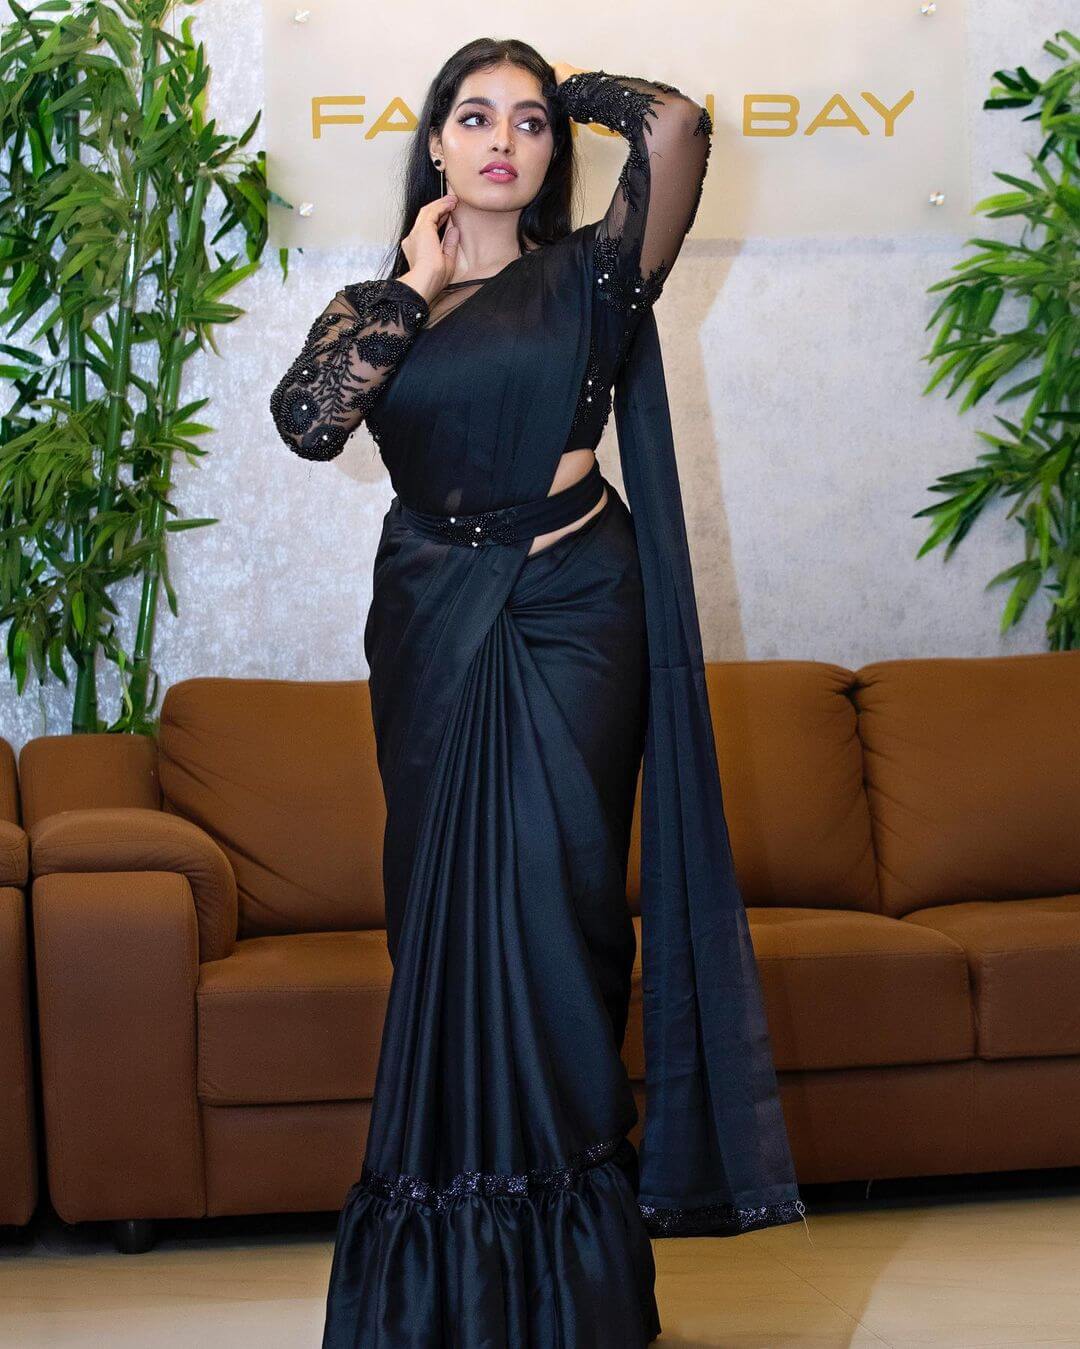 Malavika Menon Slayed Solid Black Saree Paired With Embroidered Full Sleeves Blouse